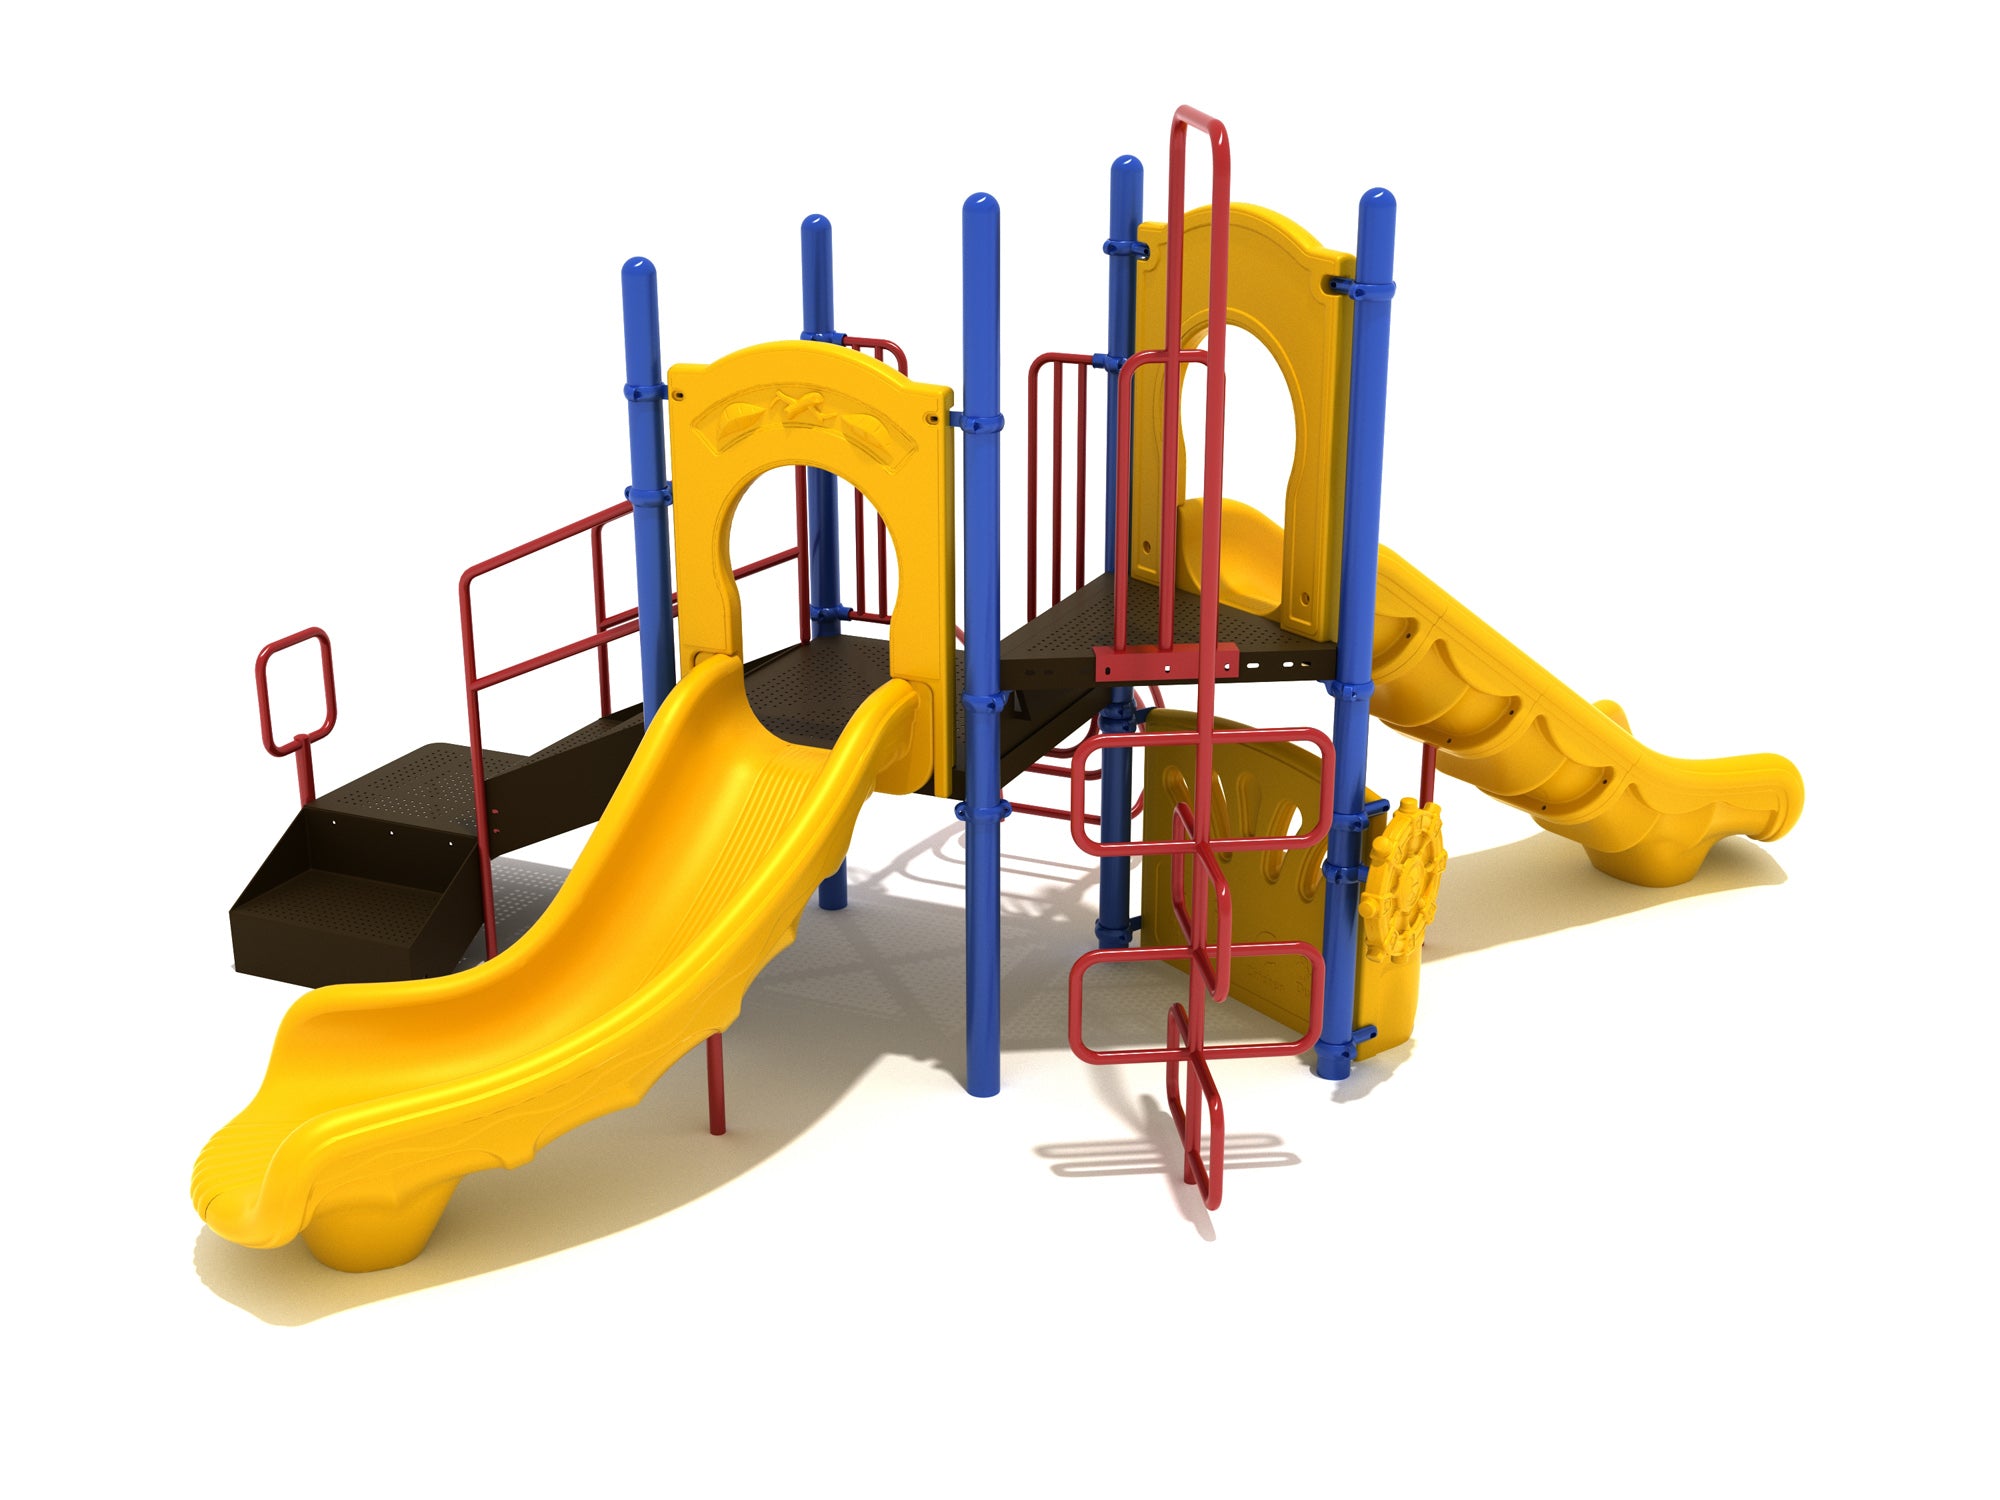  Analyzing image     Playground-Equipment-Commercial-Playgrounds-Ames-Back